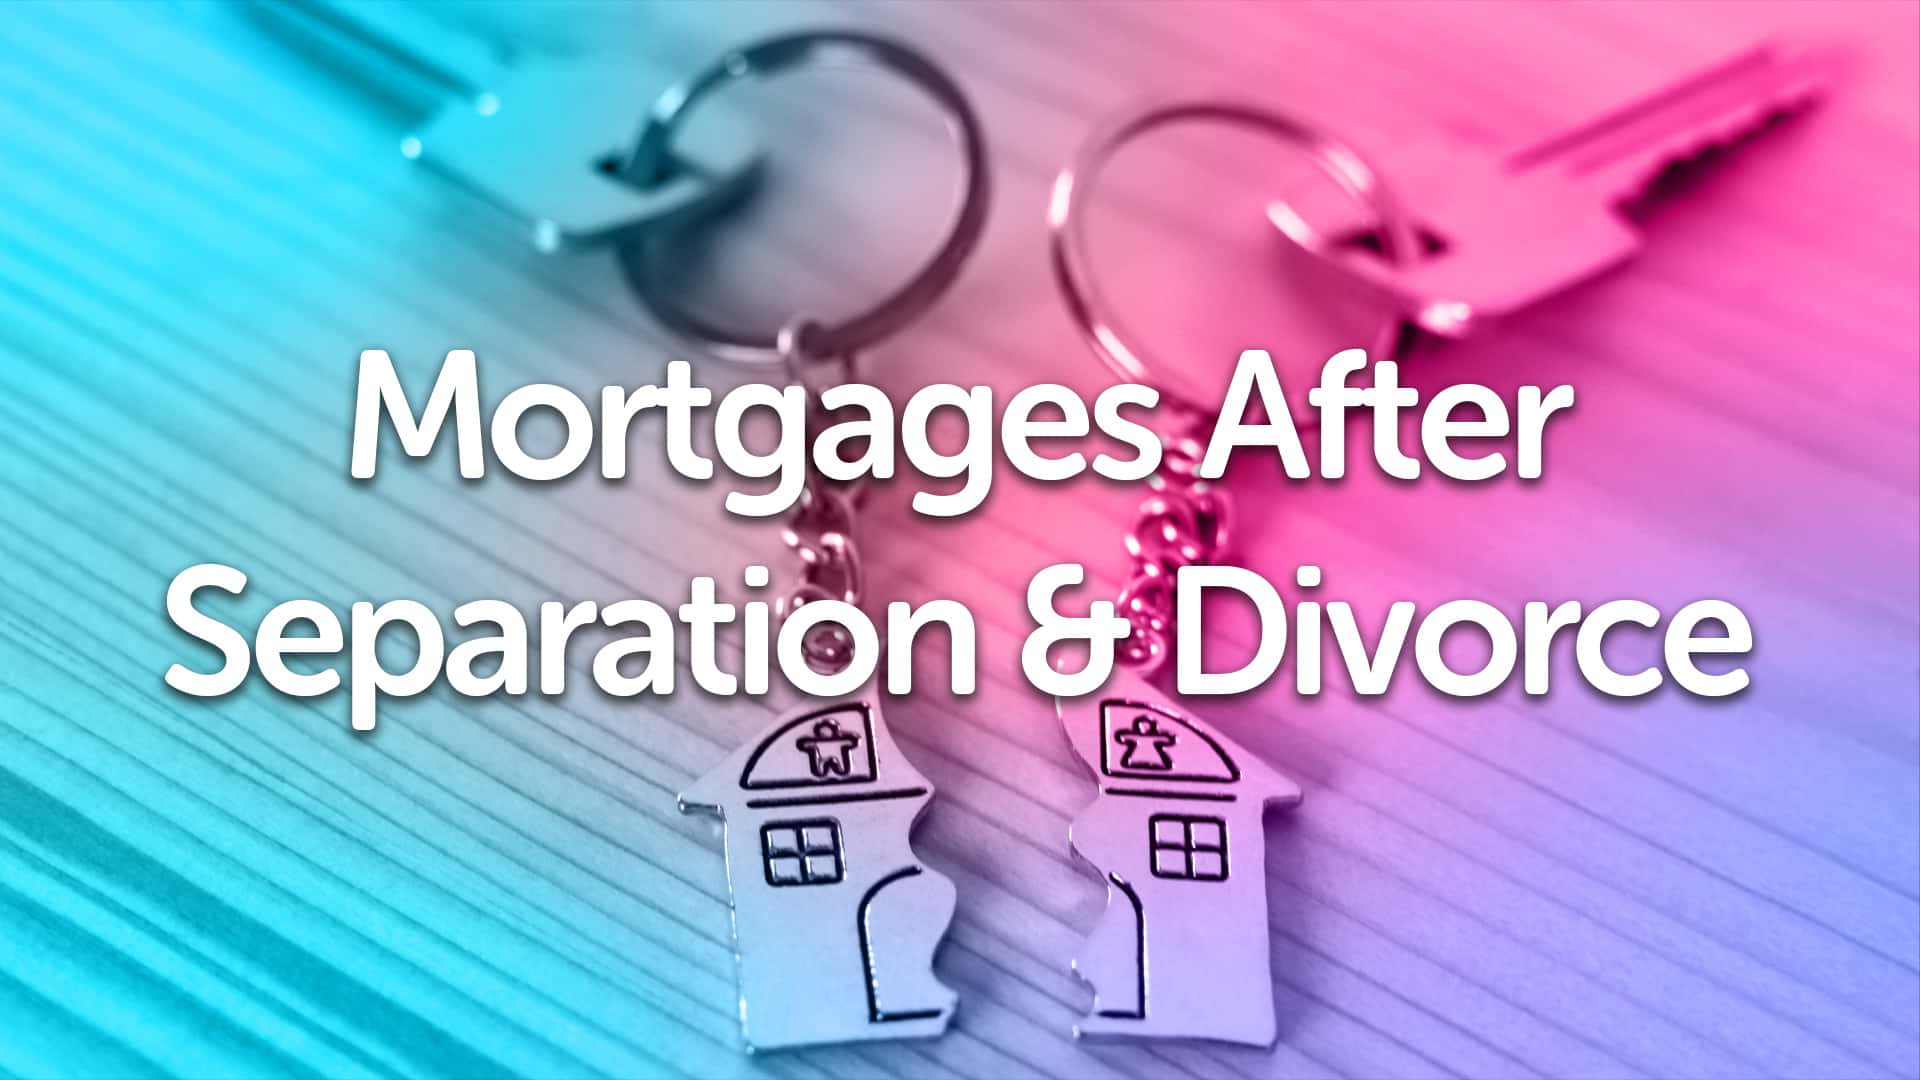 Mortgages After Separation and Divorce | Londonmoneyman